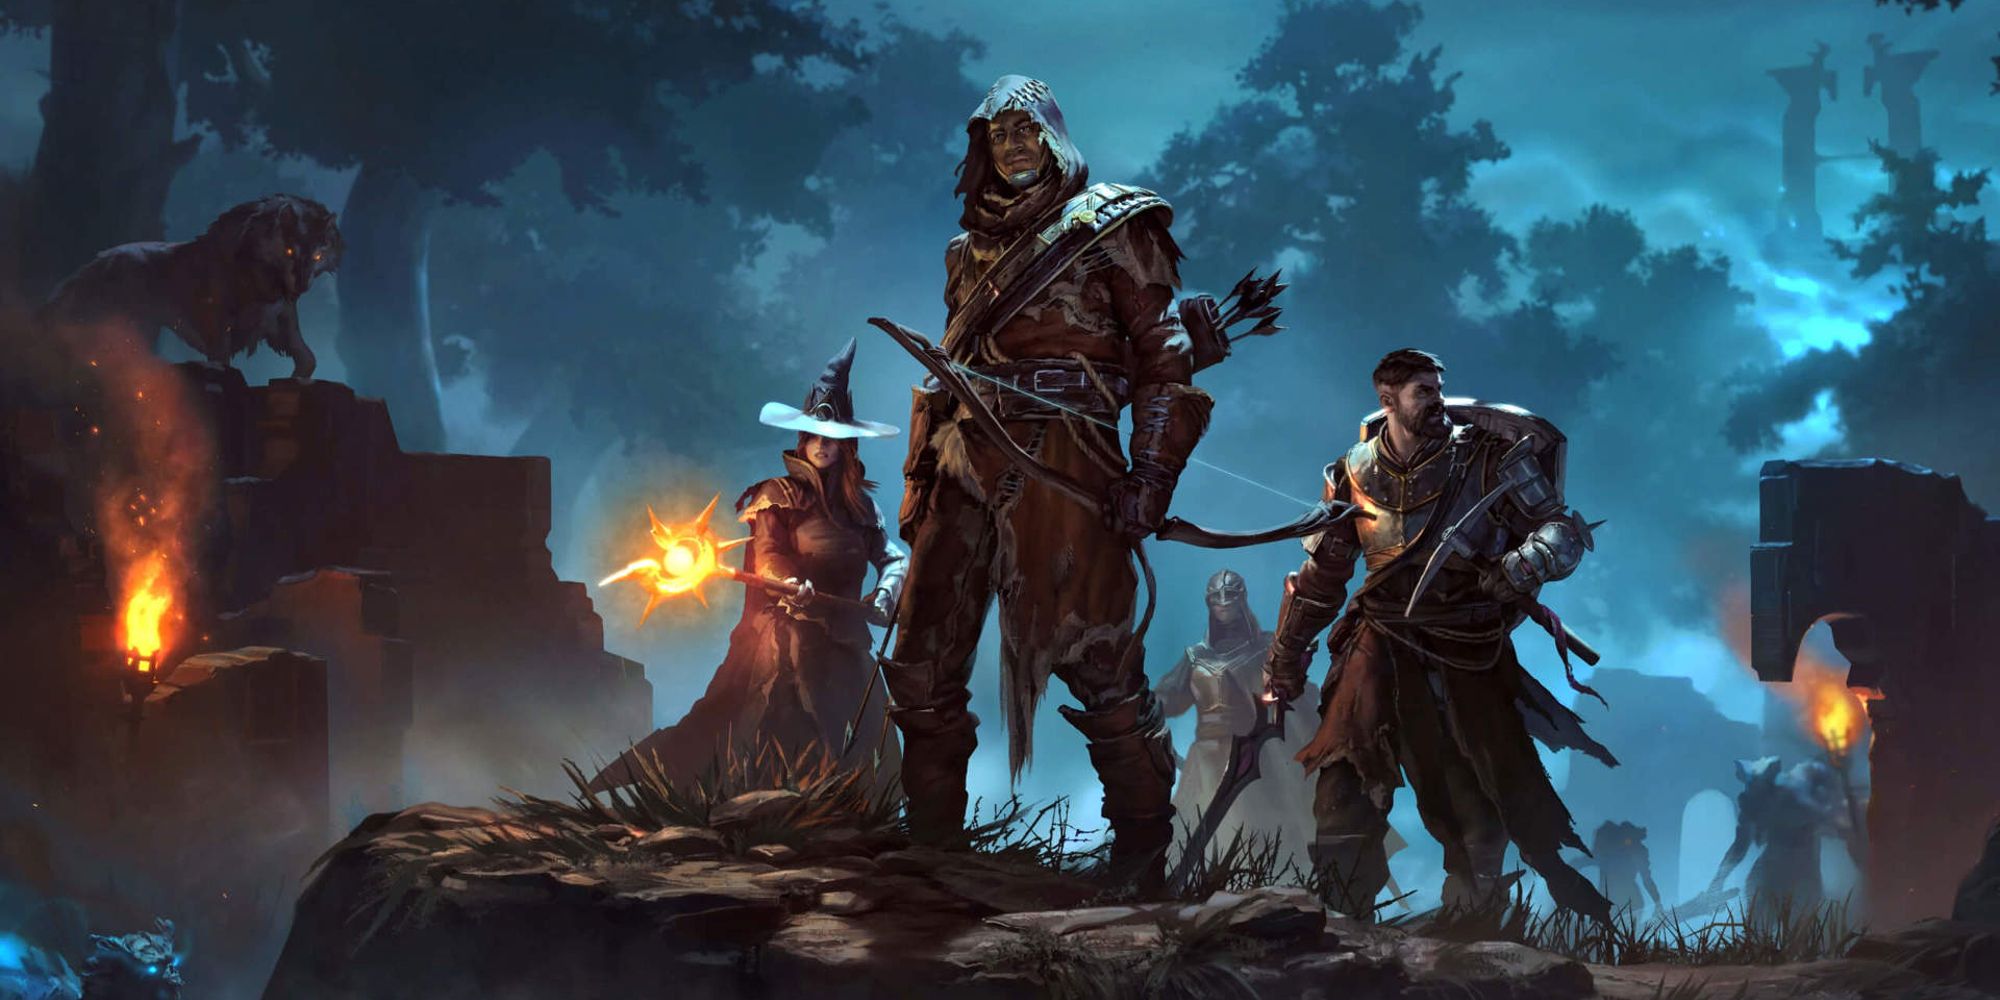 enshrouded official art showing four players